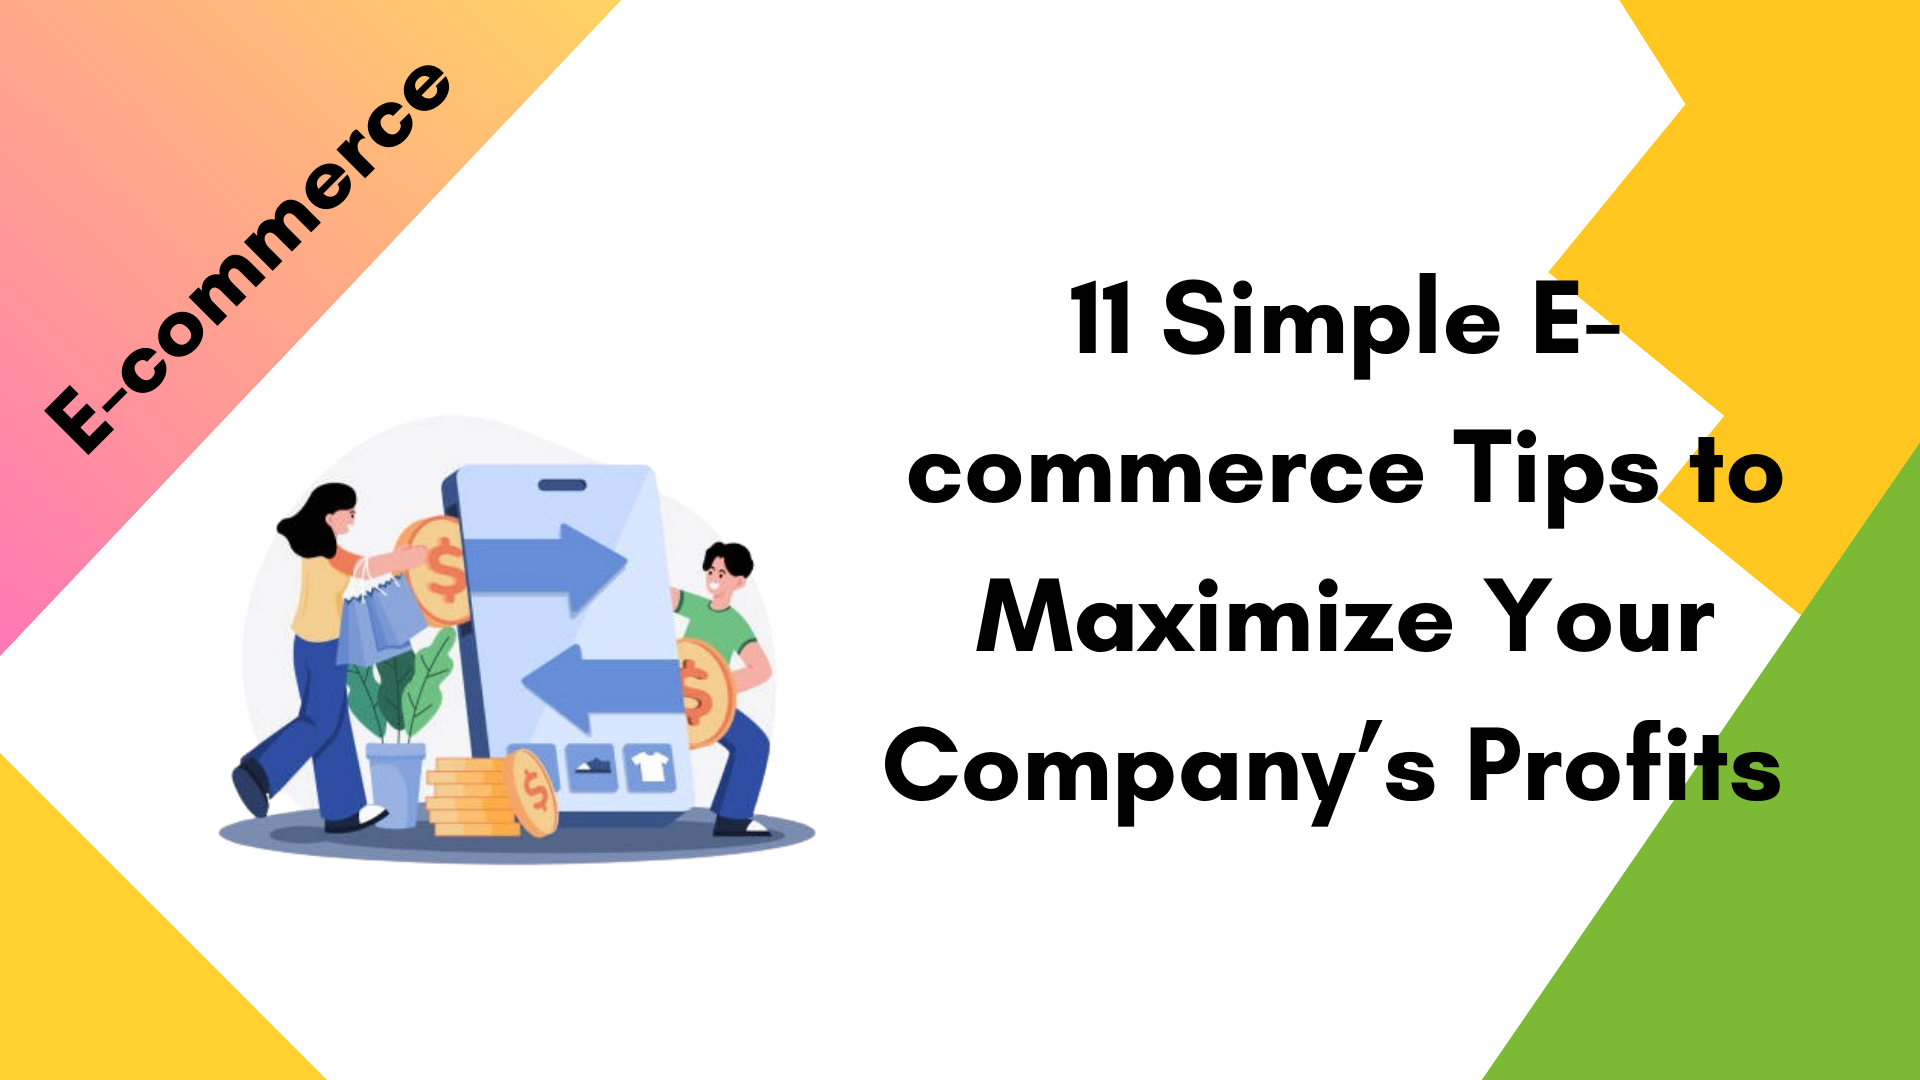 11 Simple E-commerce Tips to Maximize Your Company’s Profit